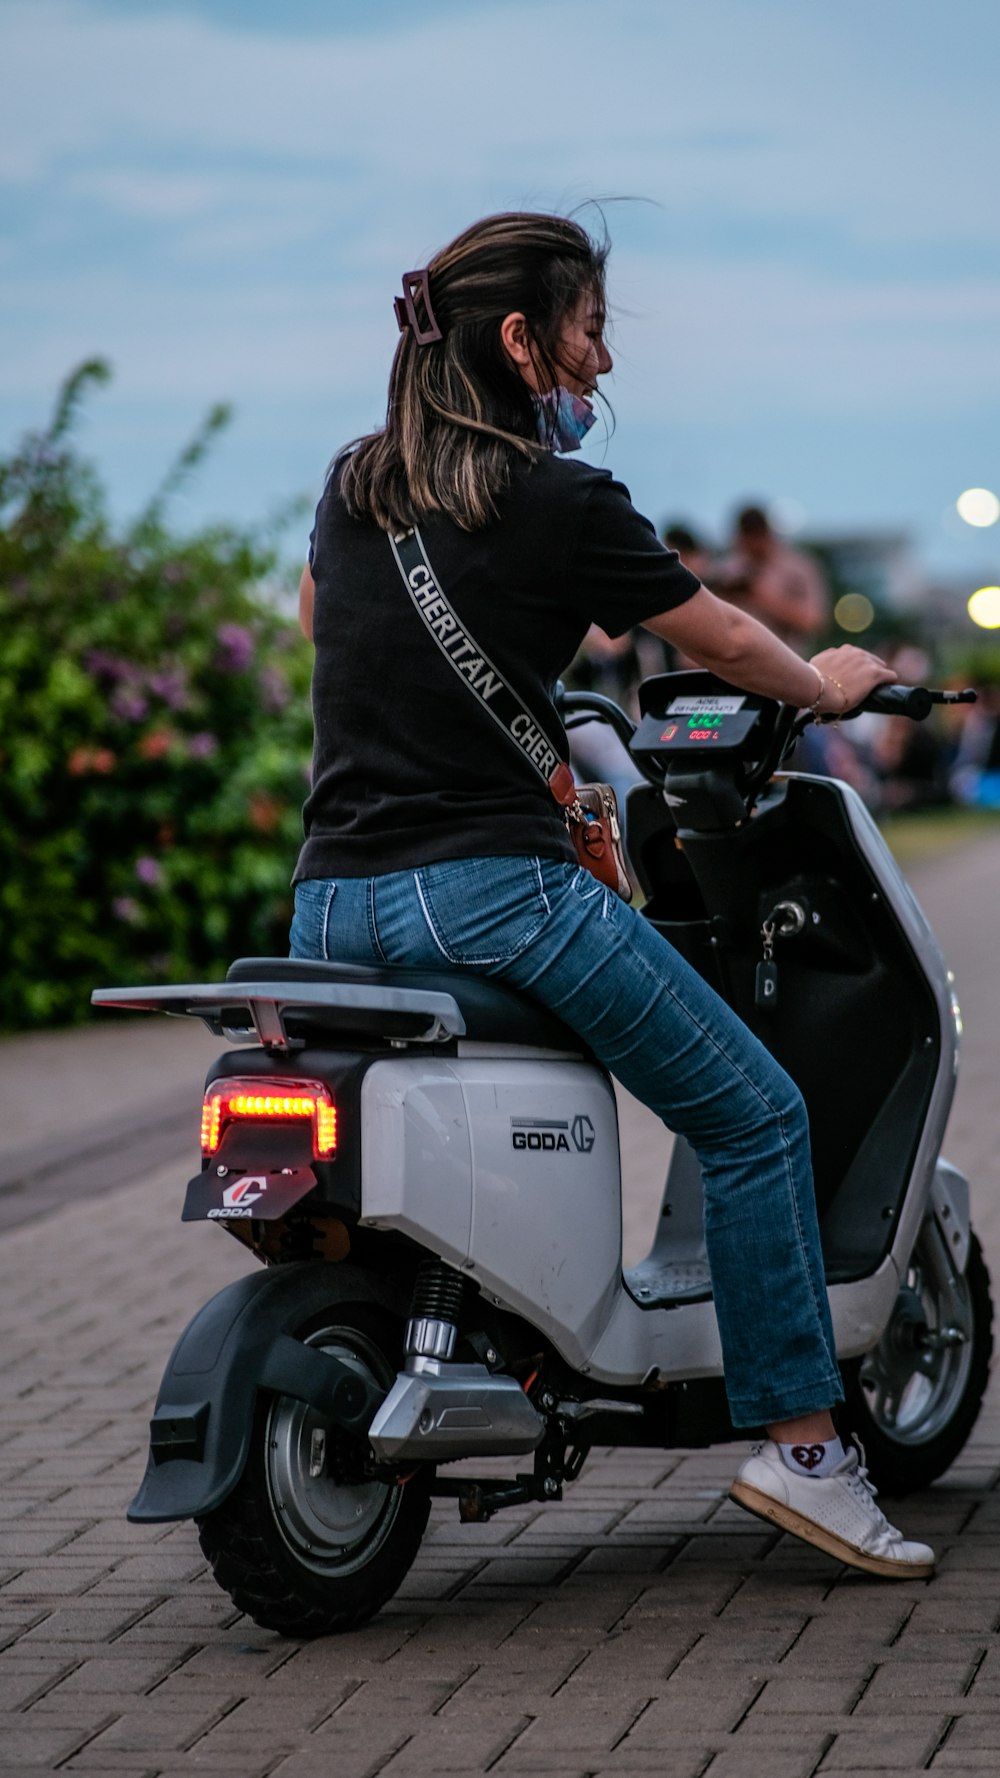 a woman riding on the back of a scooter